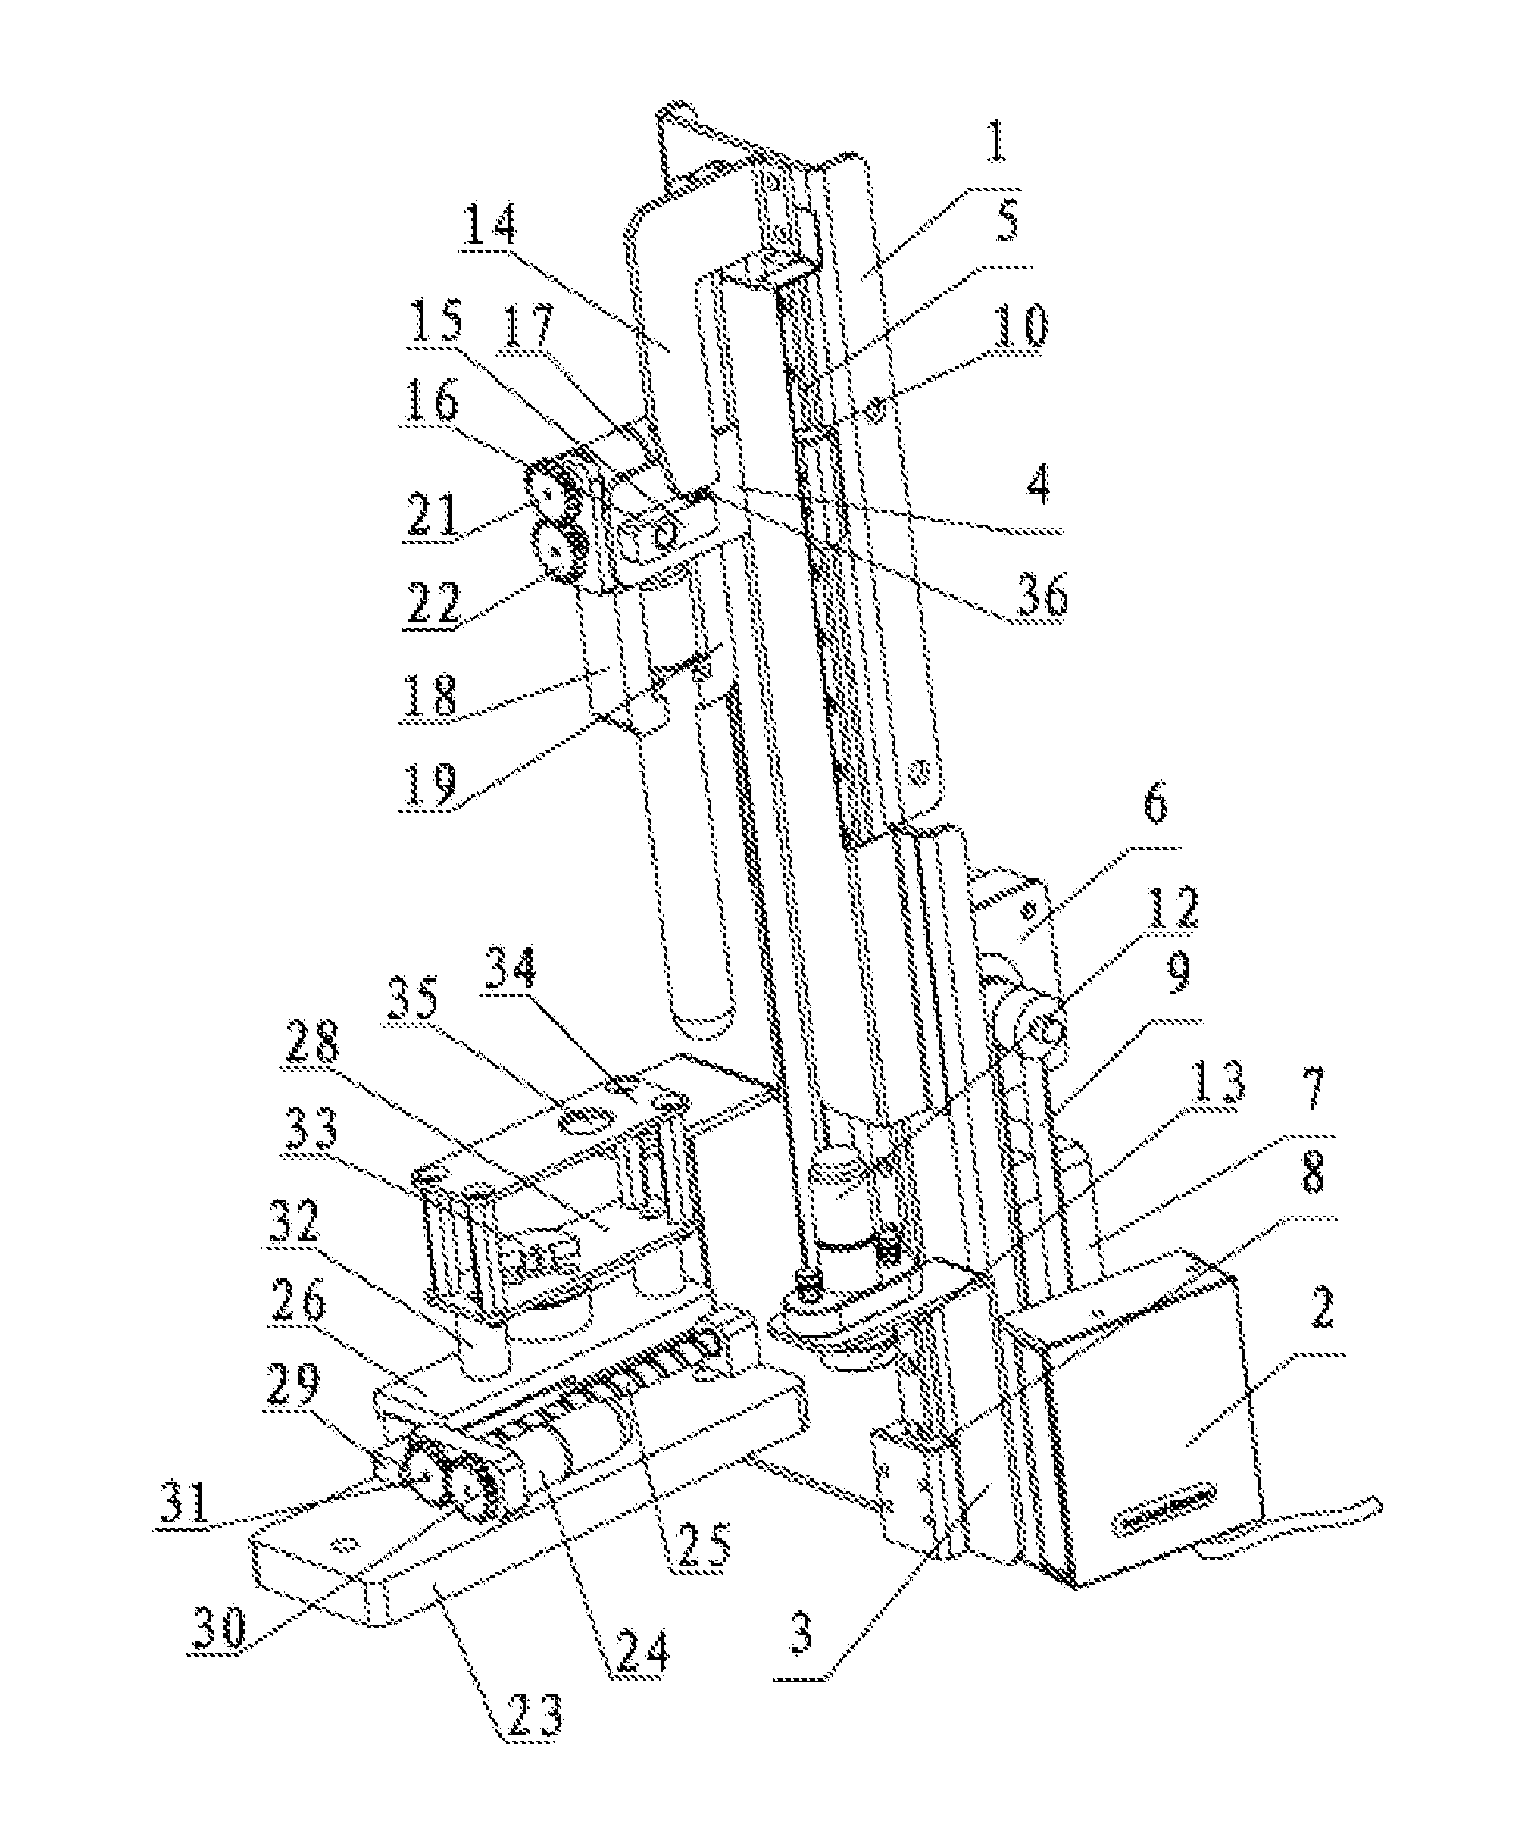 Shaking device for fully-automatic instant check meter